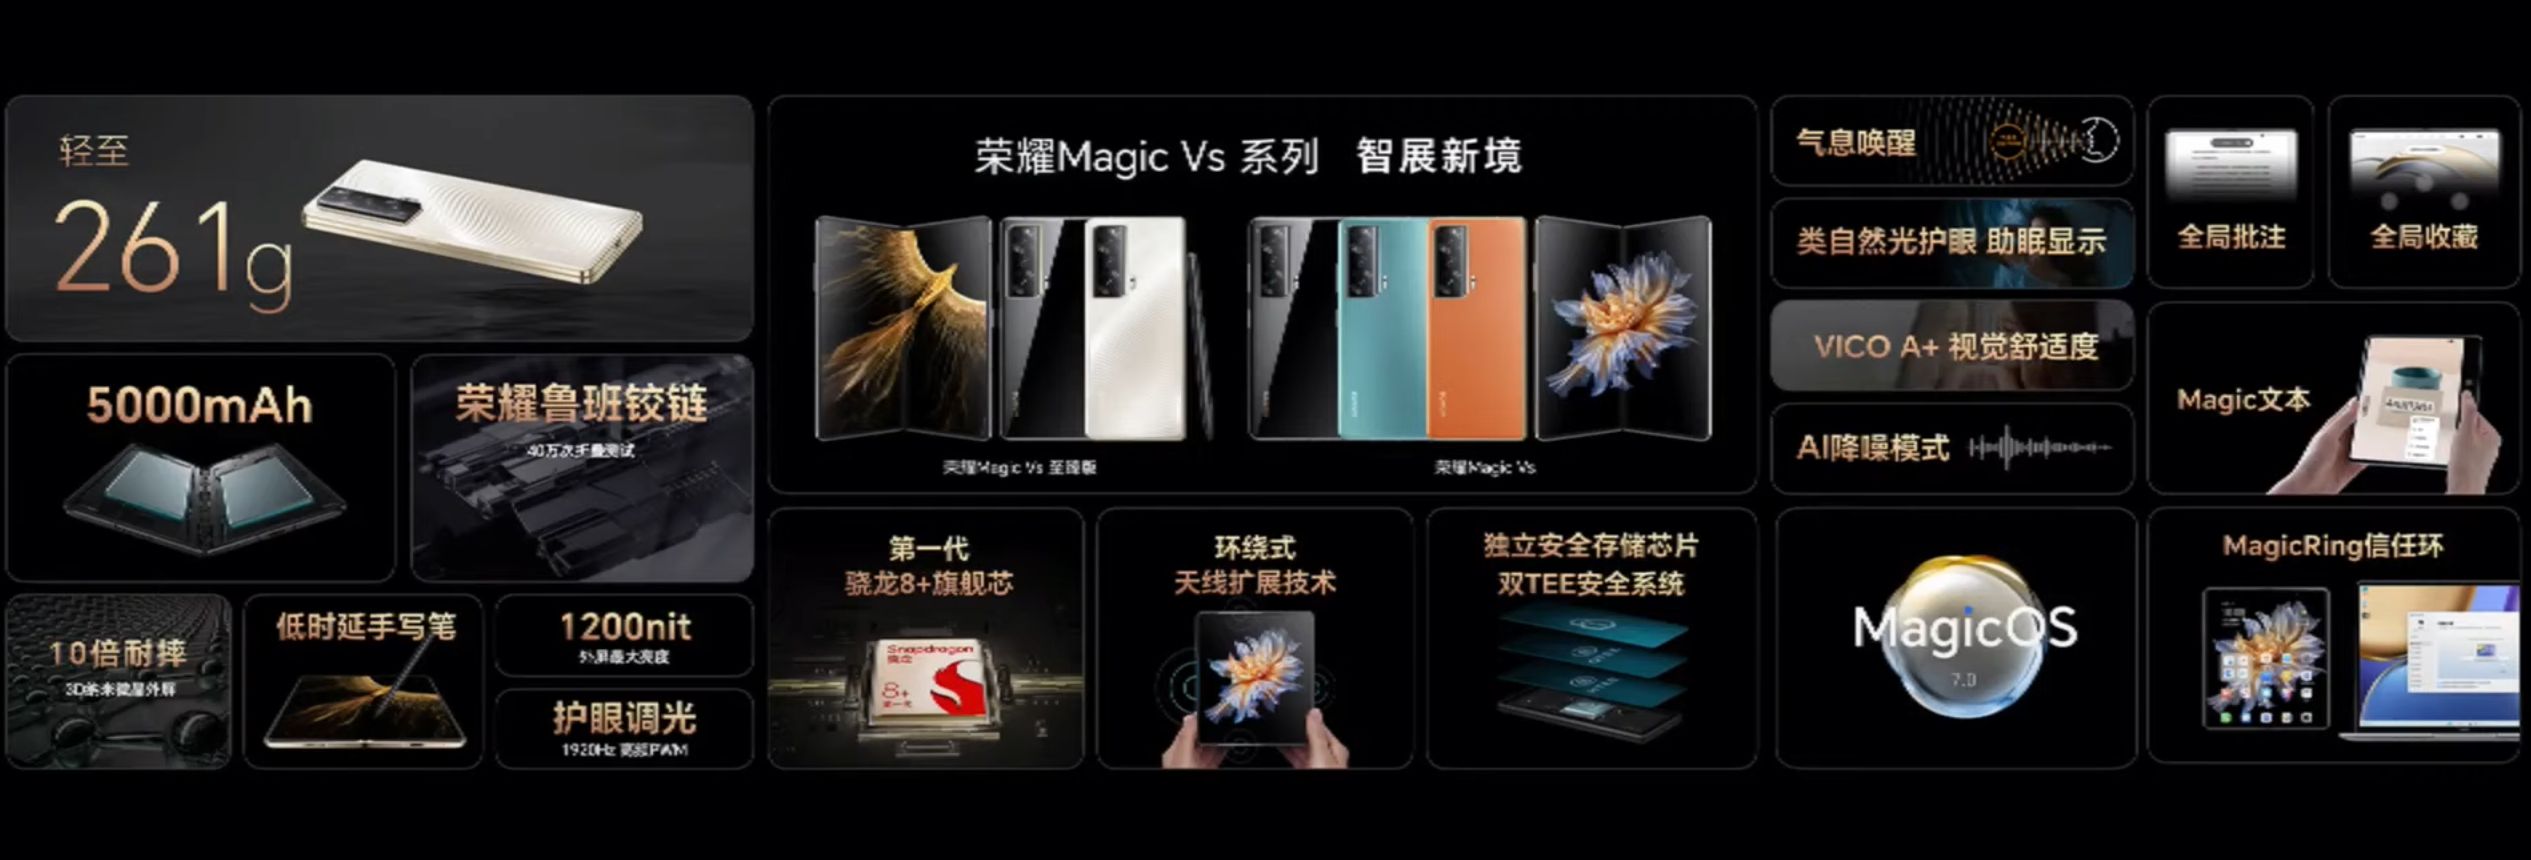 Screenshot from Honor Magic Vs launch stream showing device specifications.